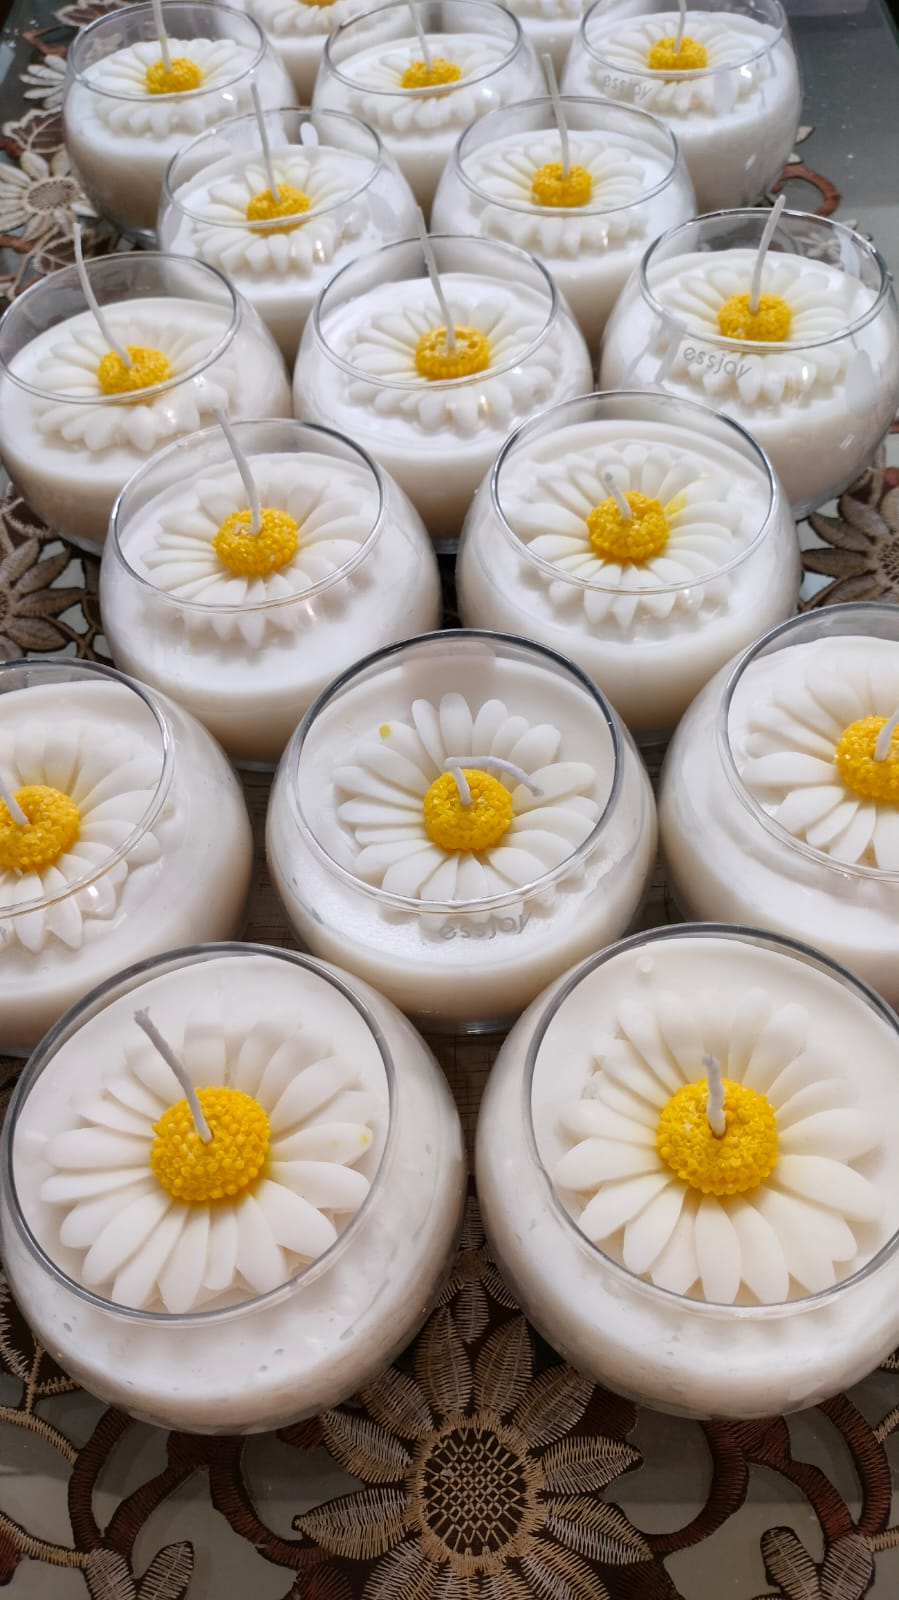 Auradecor Sun Flower Mould for Candle Making